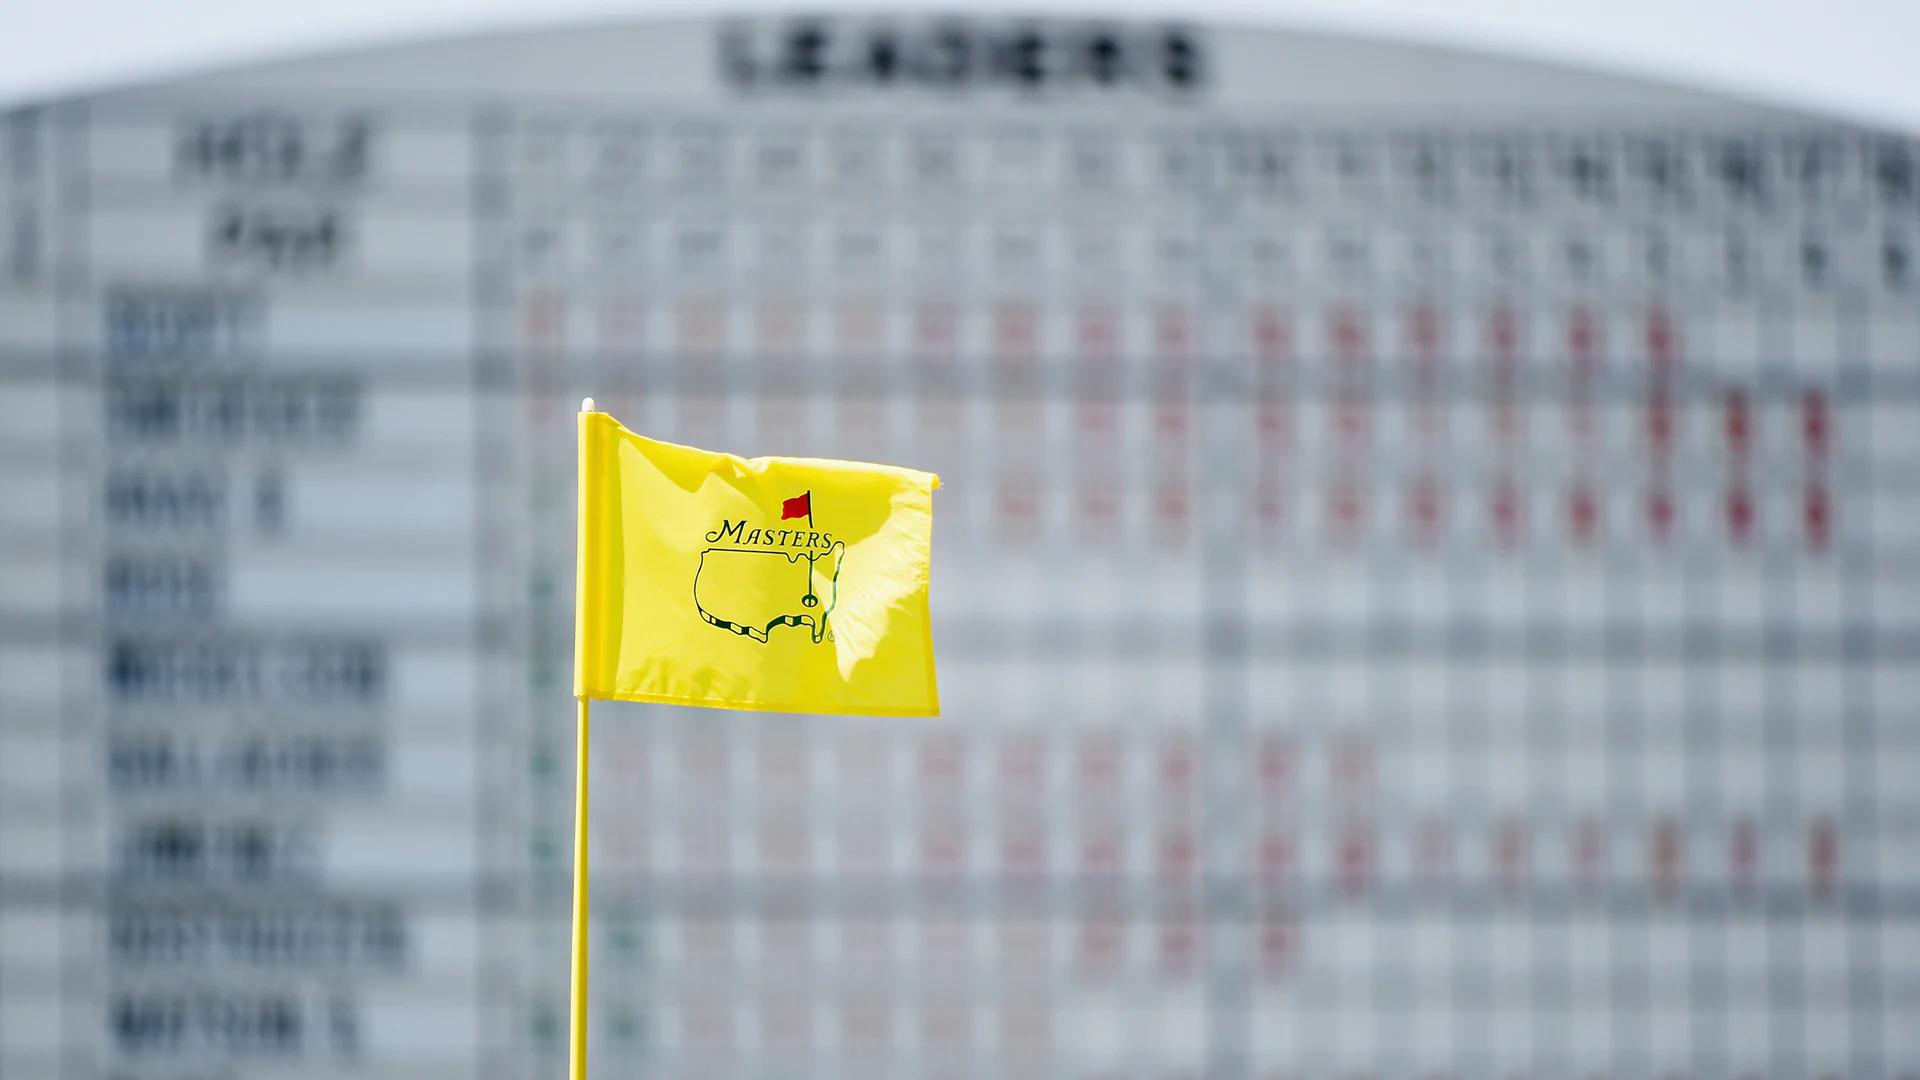 How to watch the 2022 Masters Tournament on TV and online